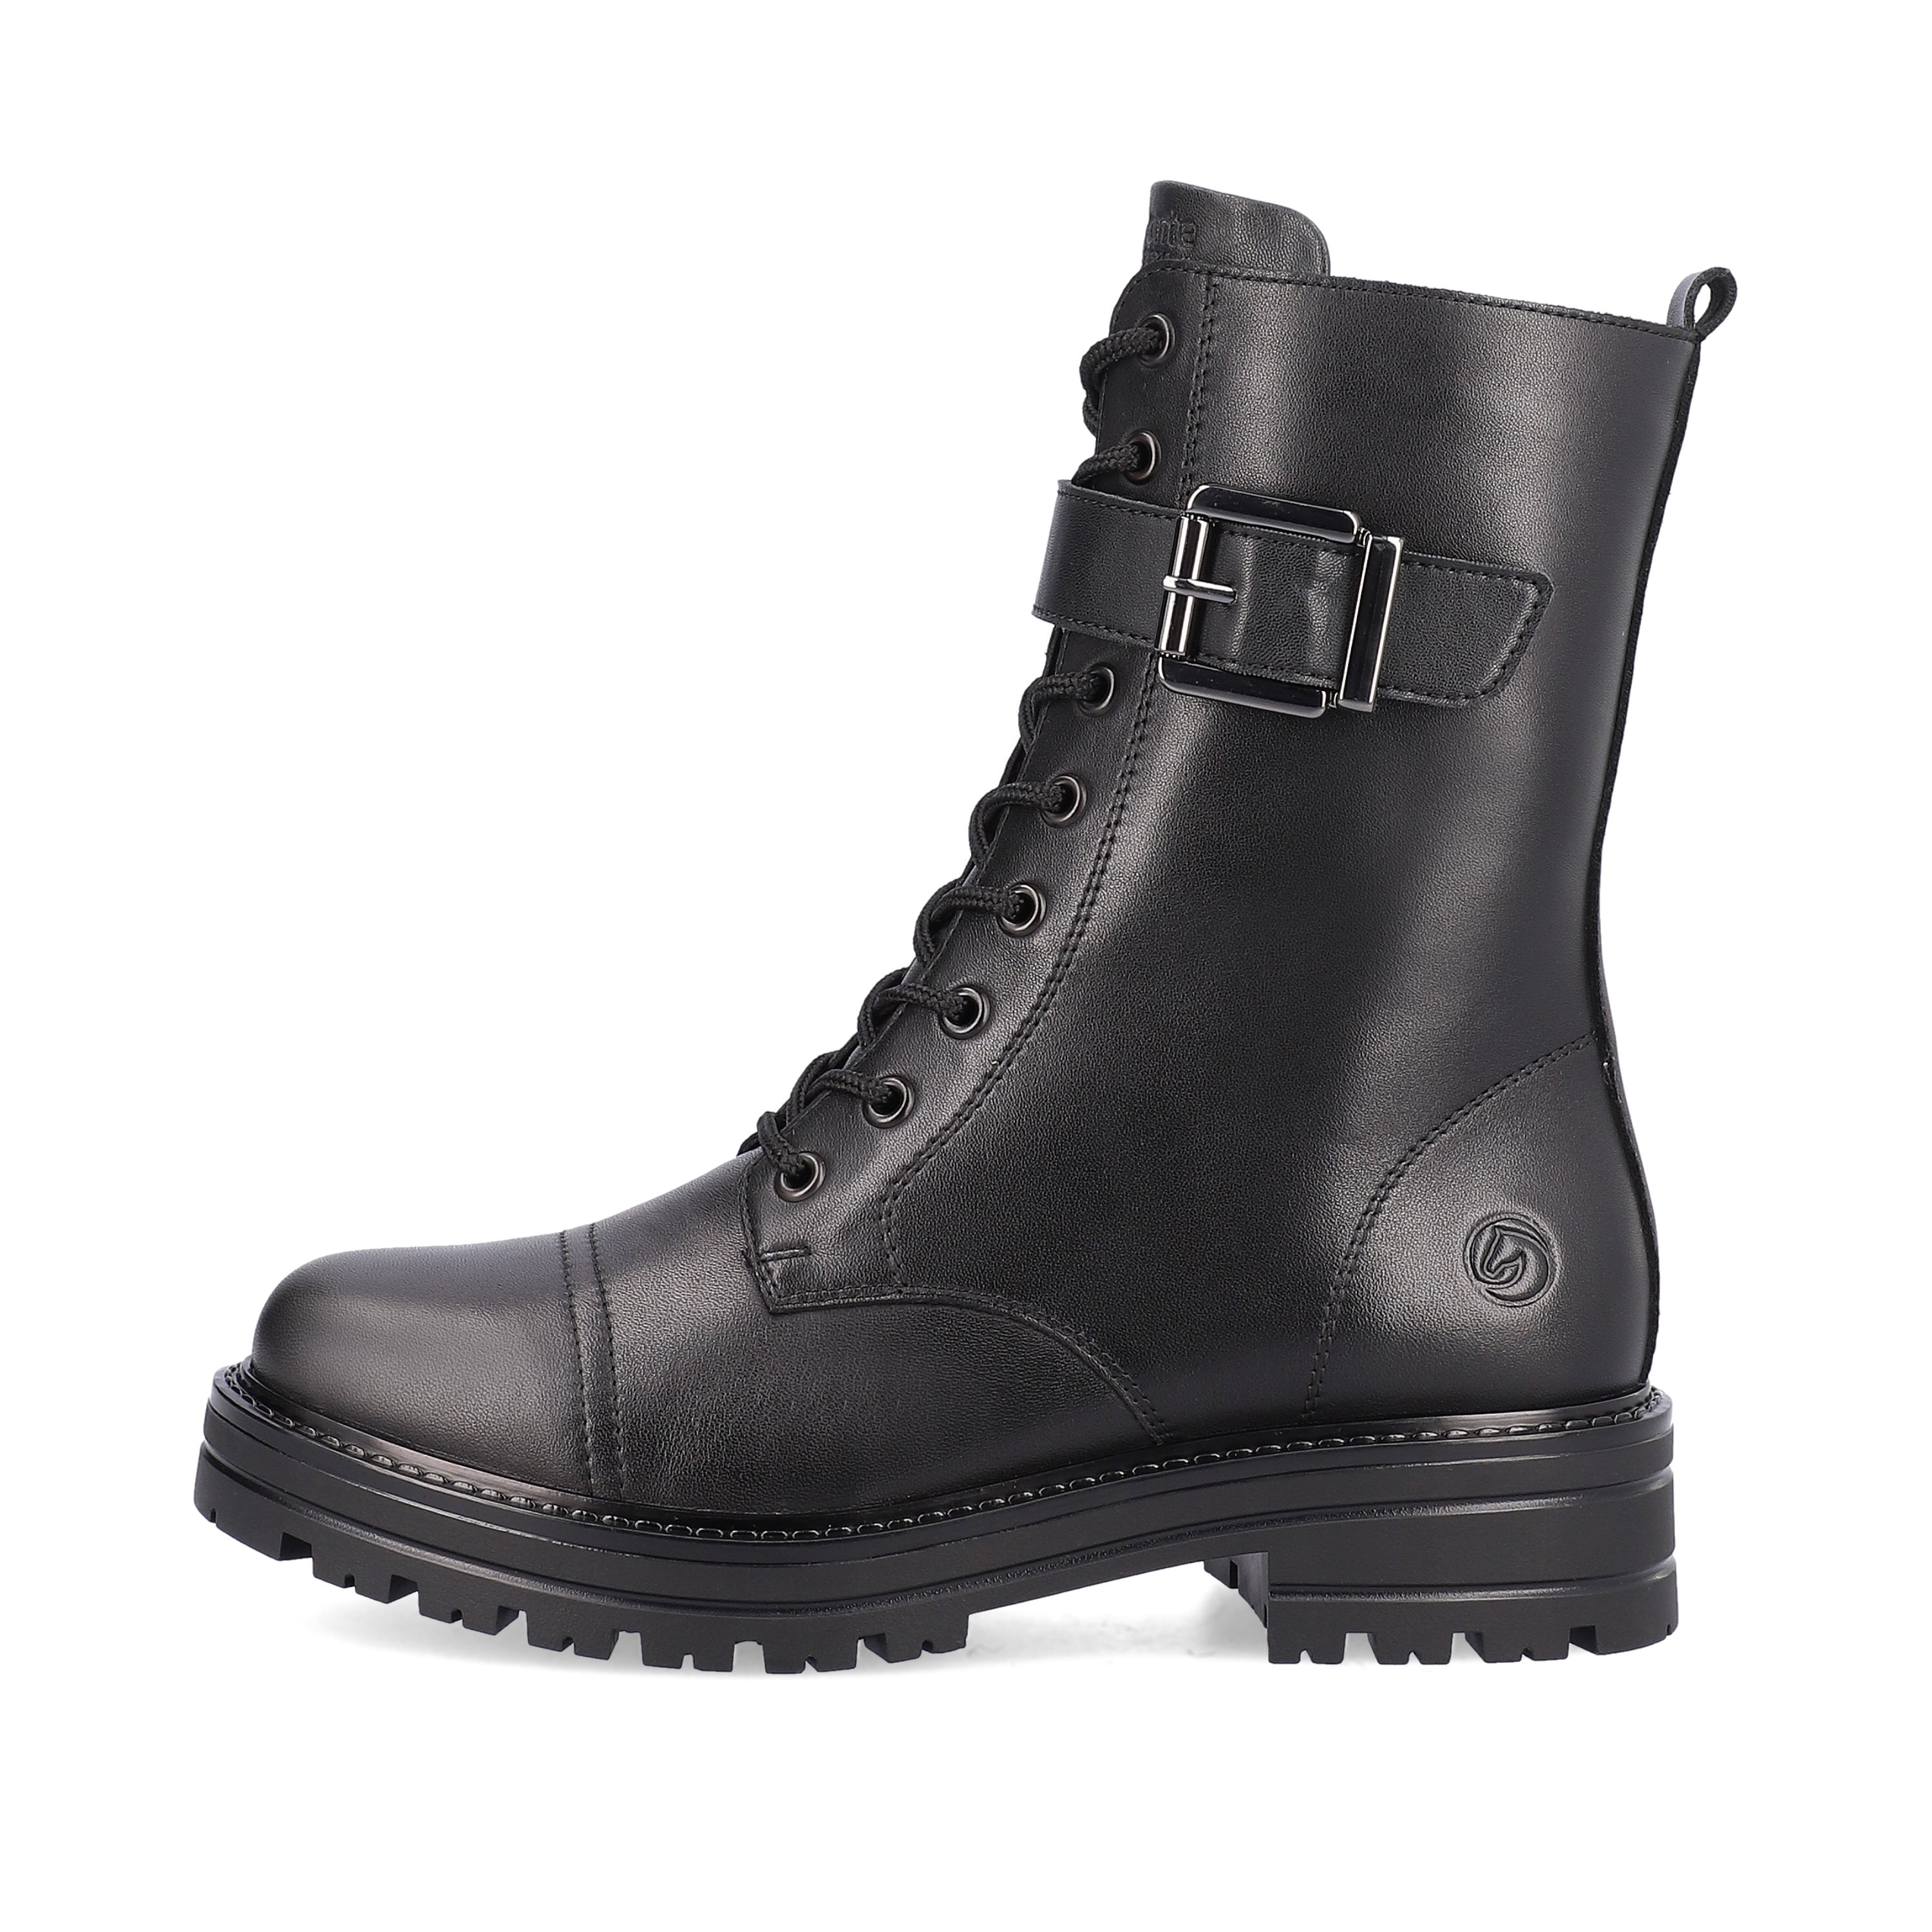 Midnight black remonte women´s biker boots D2283-01 with cushioning profile sole. The outside of the shoe